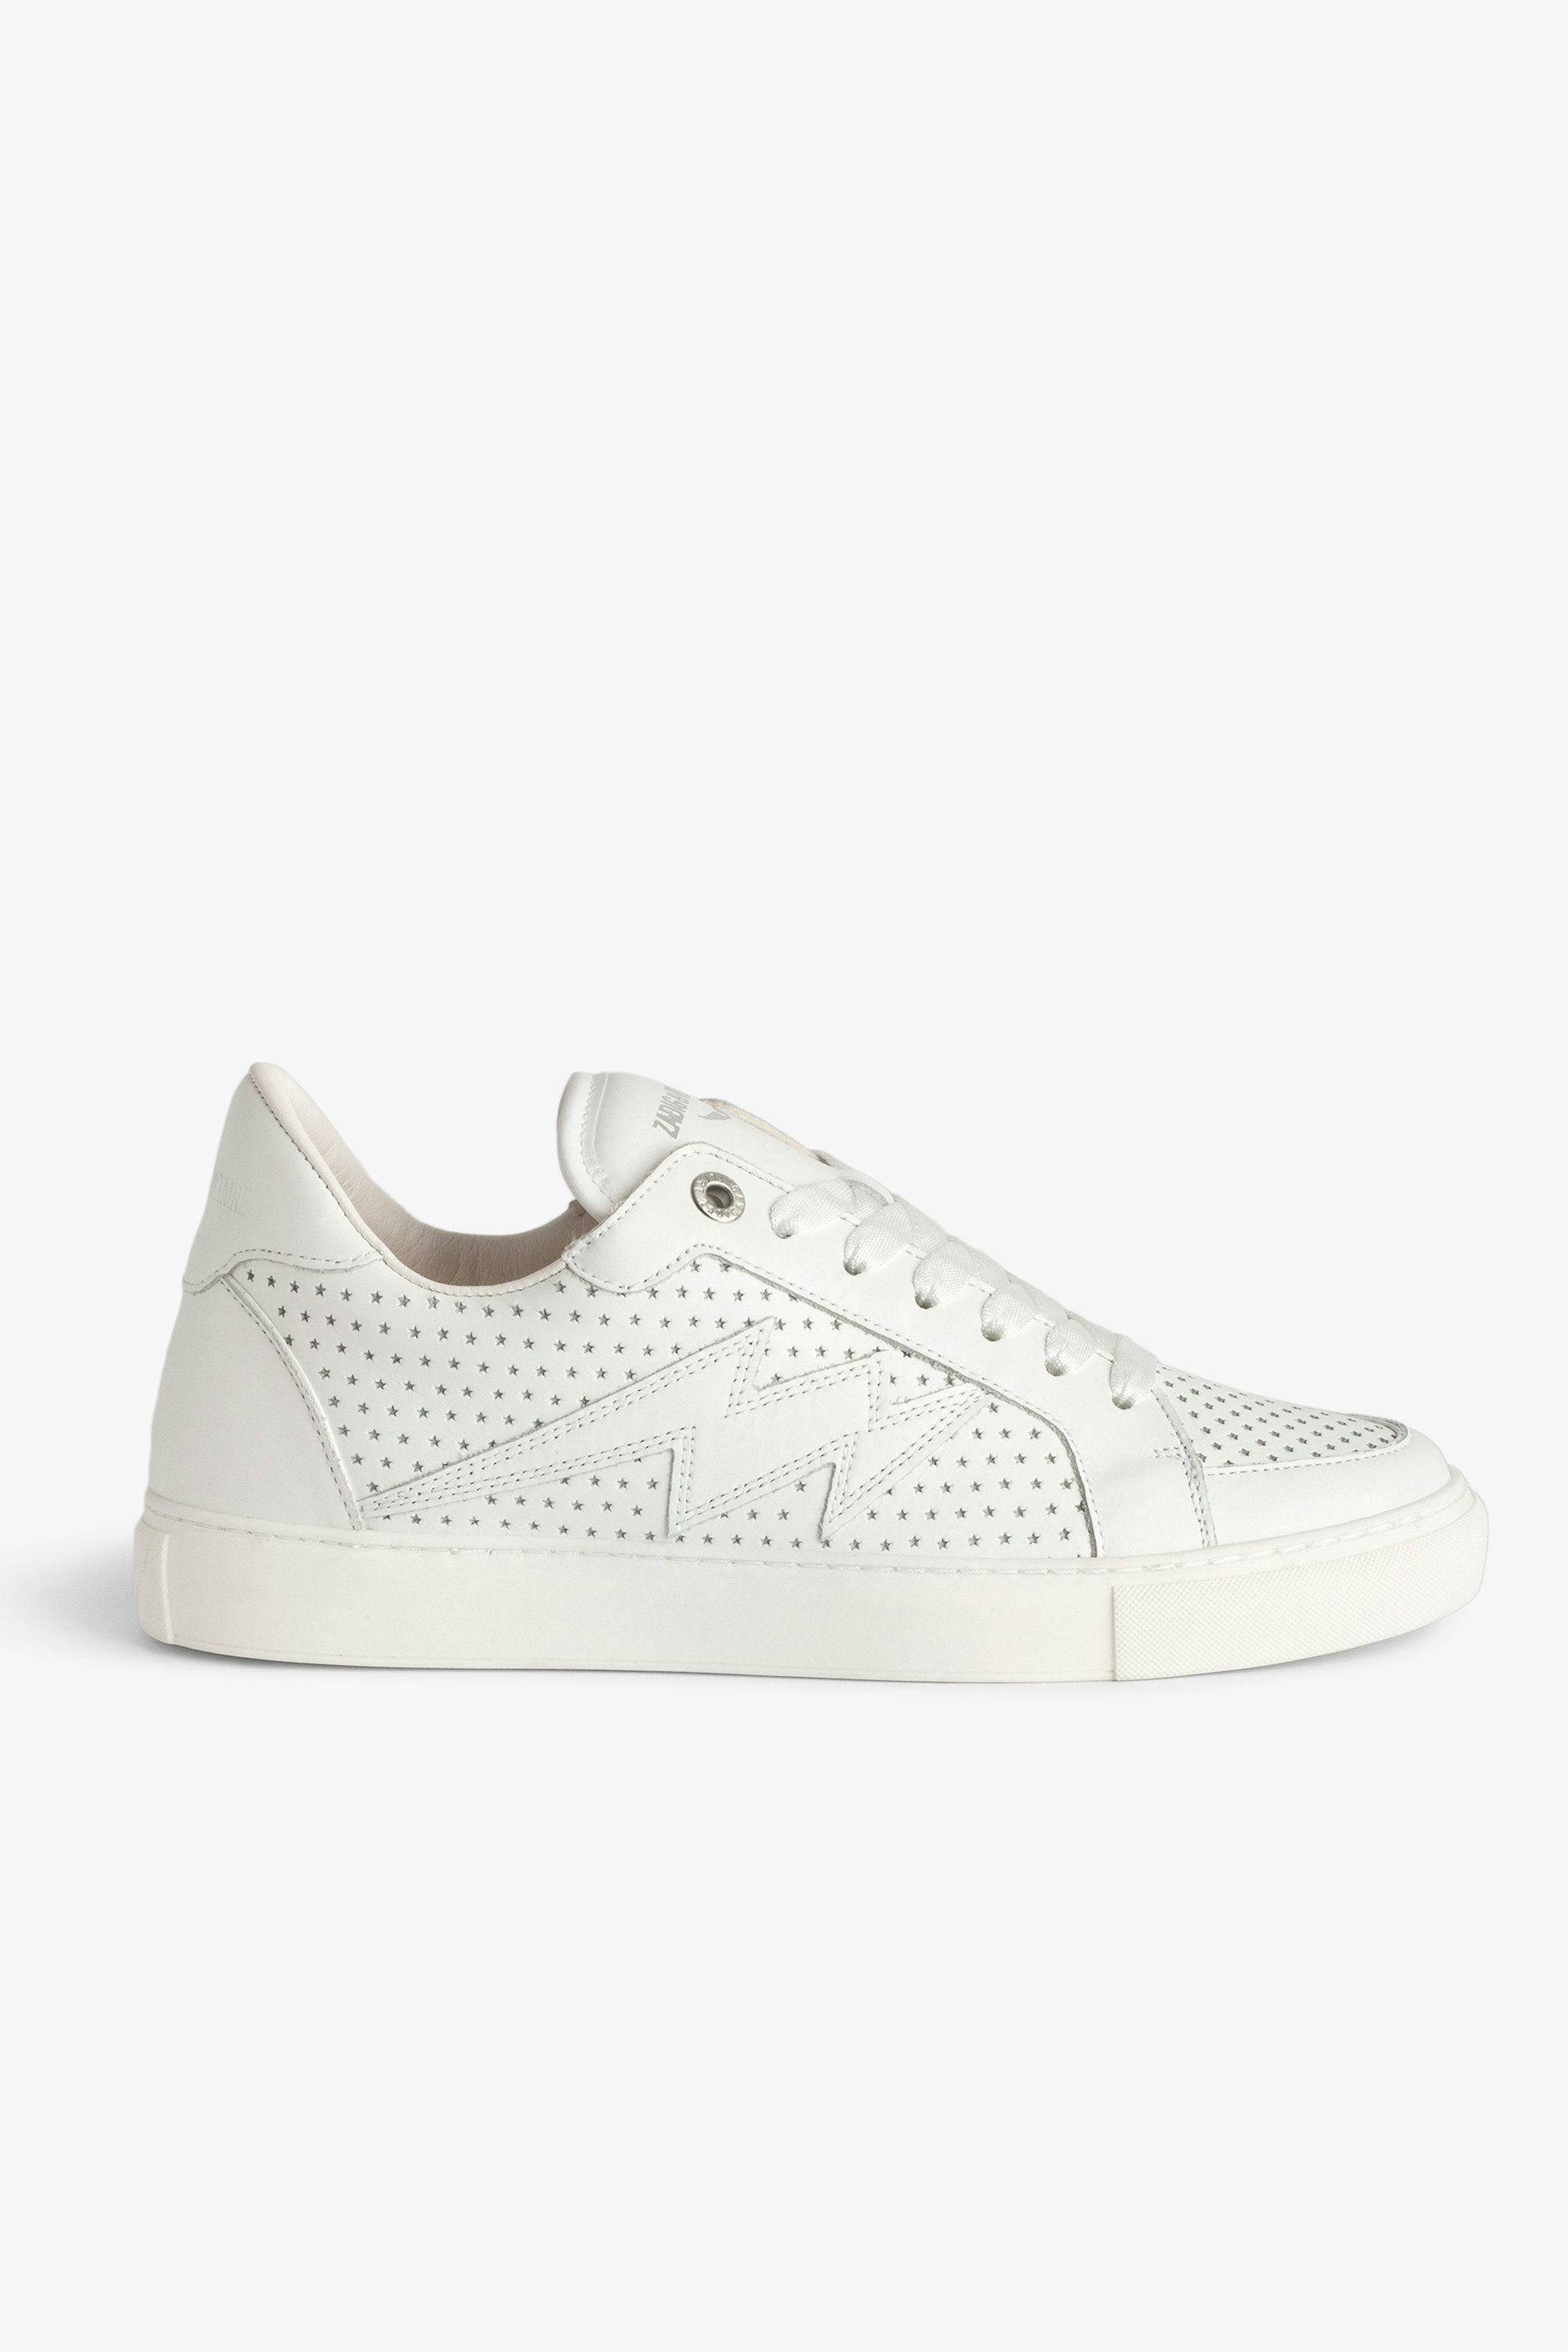 ZV1747 La Flash Low-Top Trainers - White perforated leather low-top trainers with star motifs and lightning bolt patch.